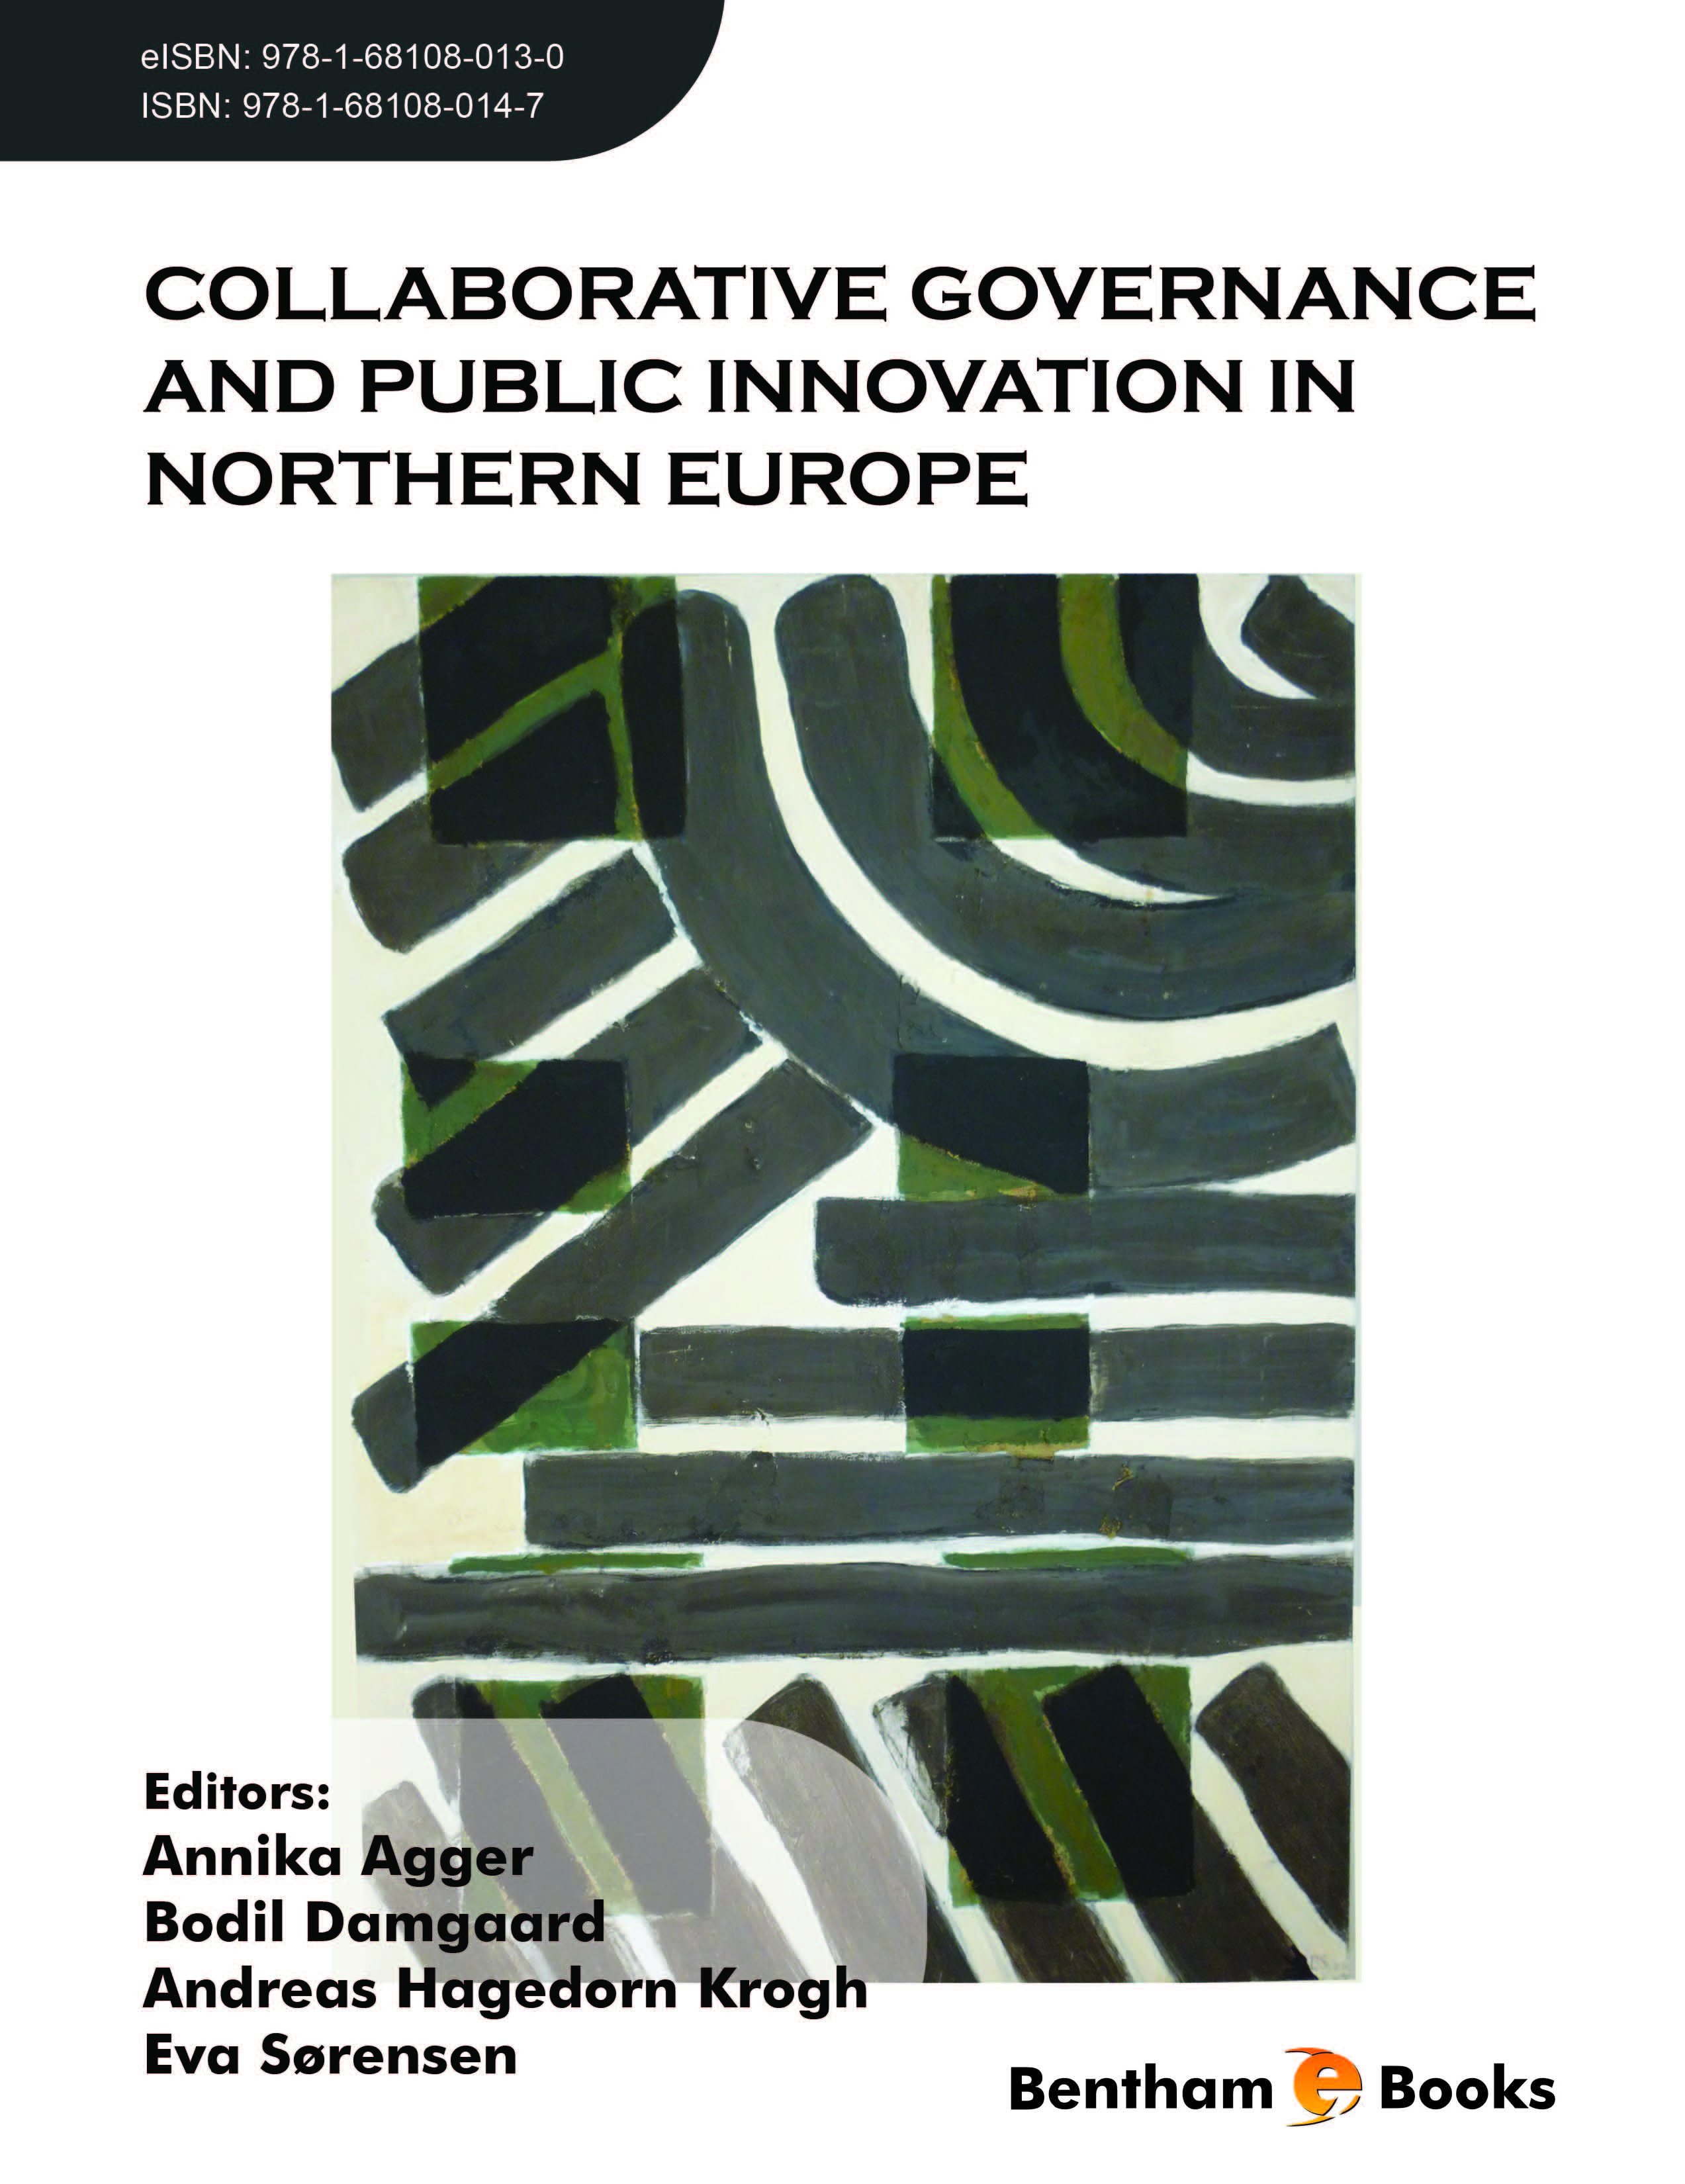 Collaborative Governance and Public Innovation in Northern Europe